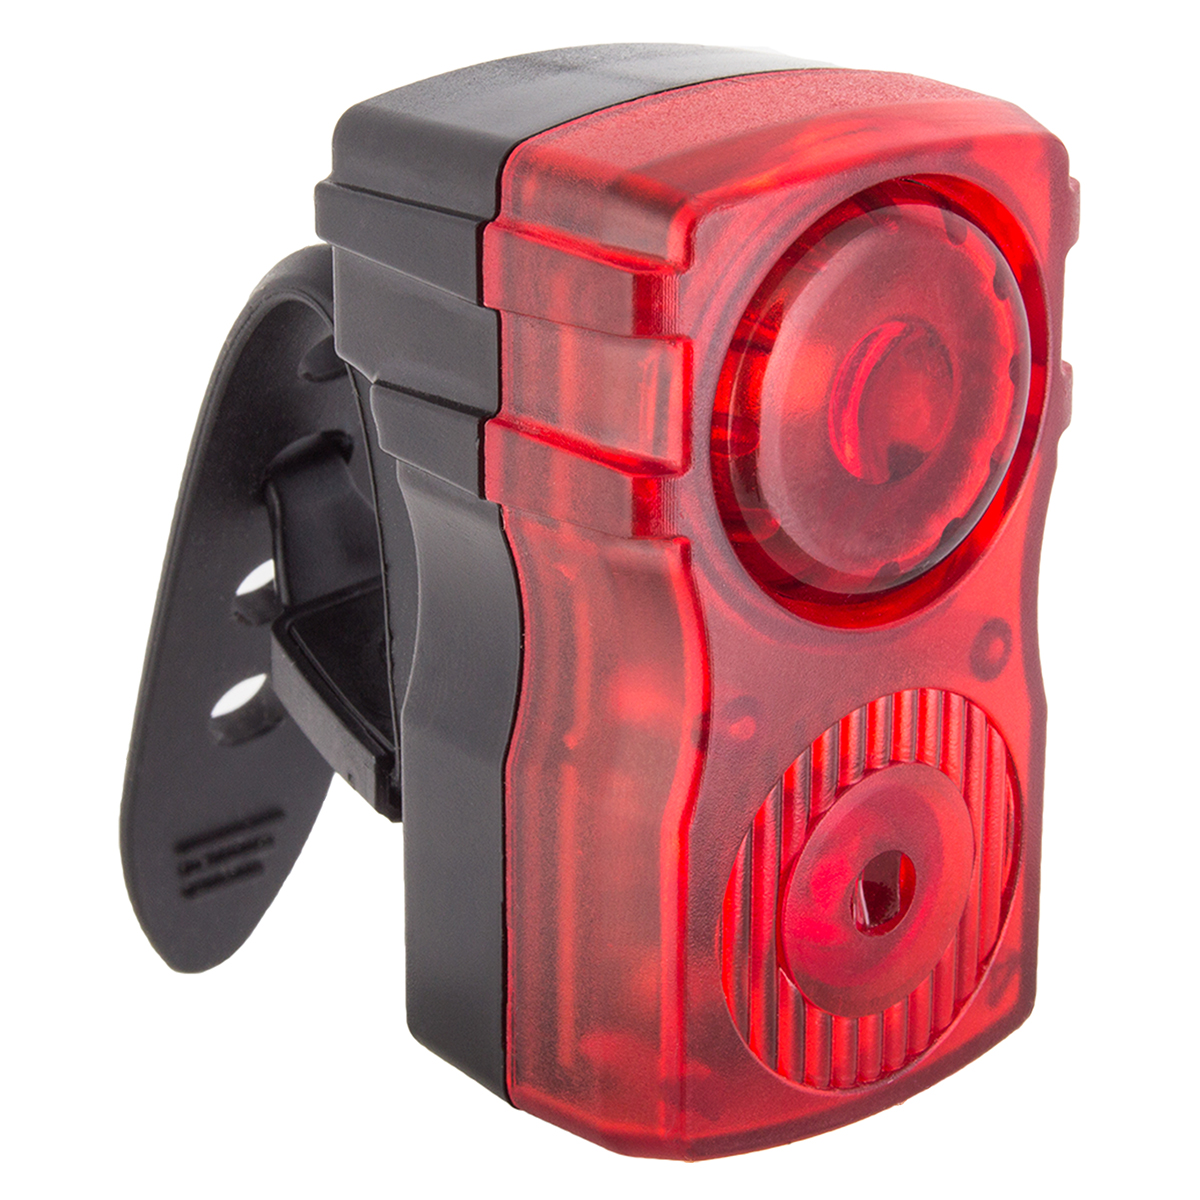 SUNLITE  ION FRONT AND REAR BICYCLE LIGHTS